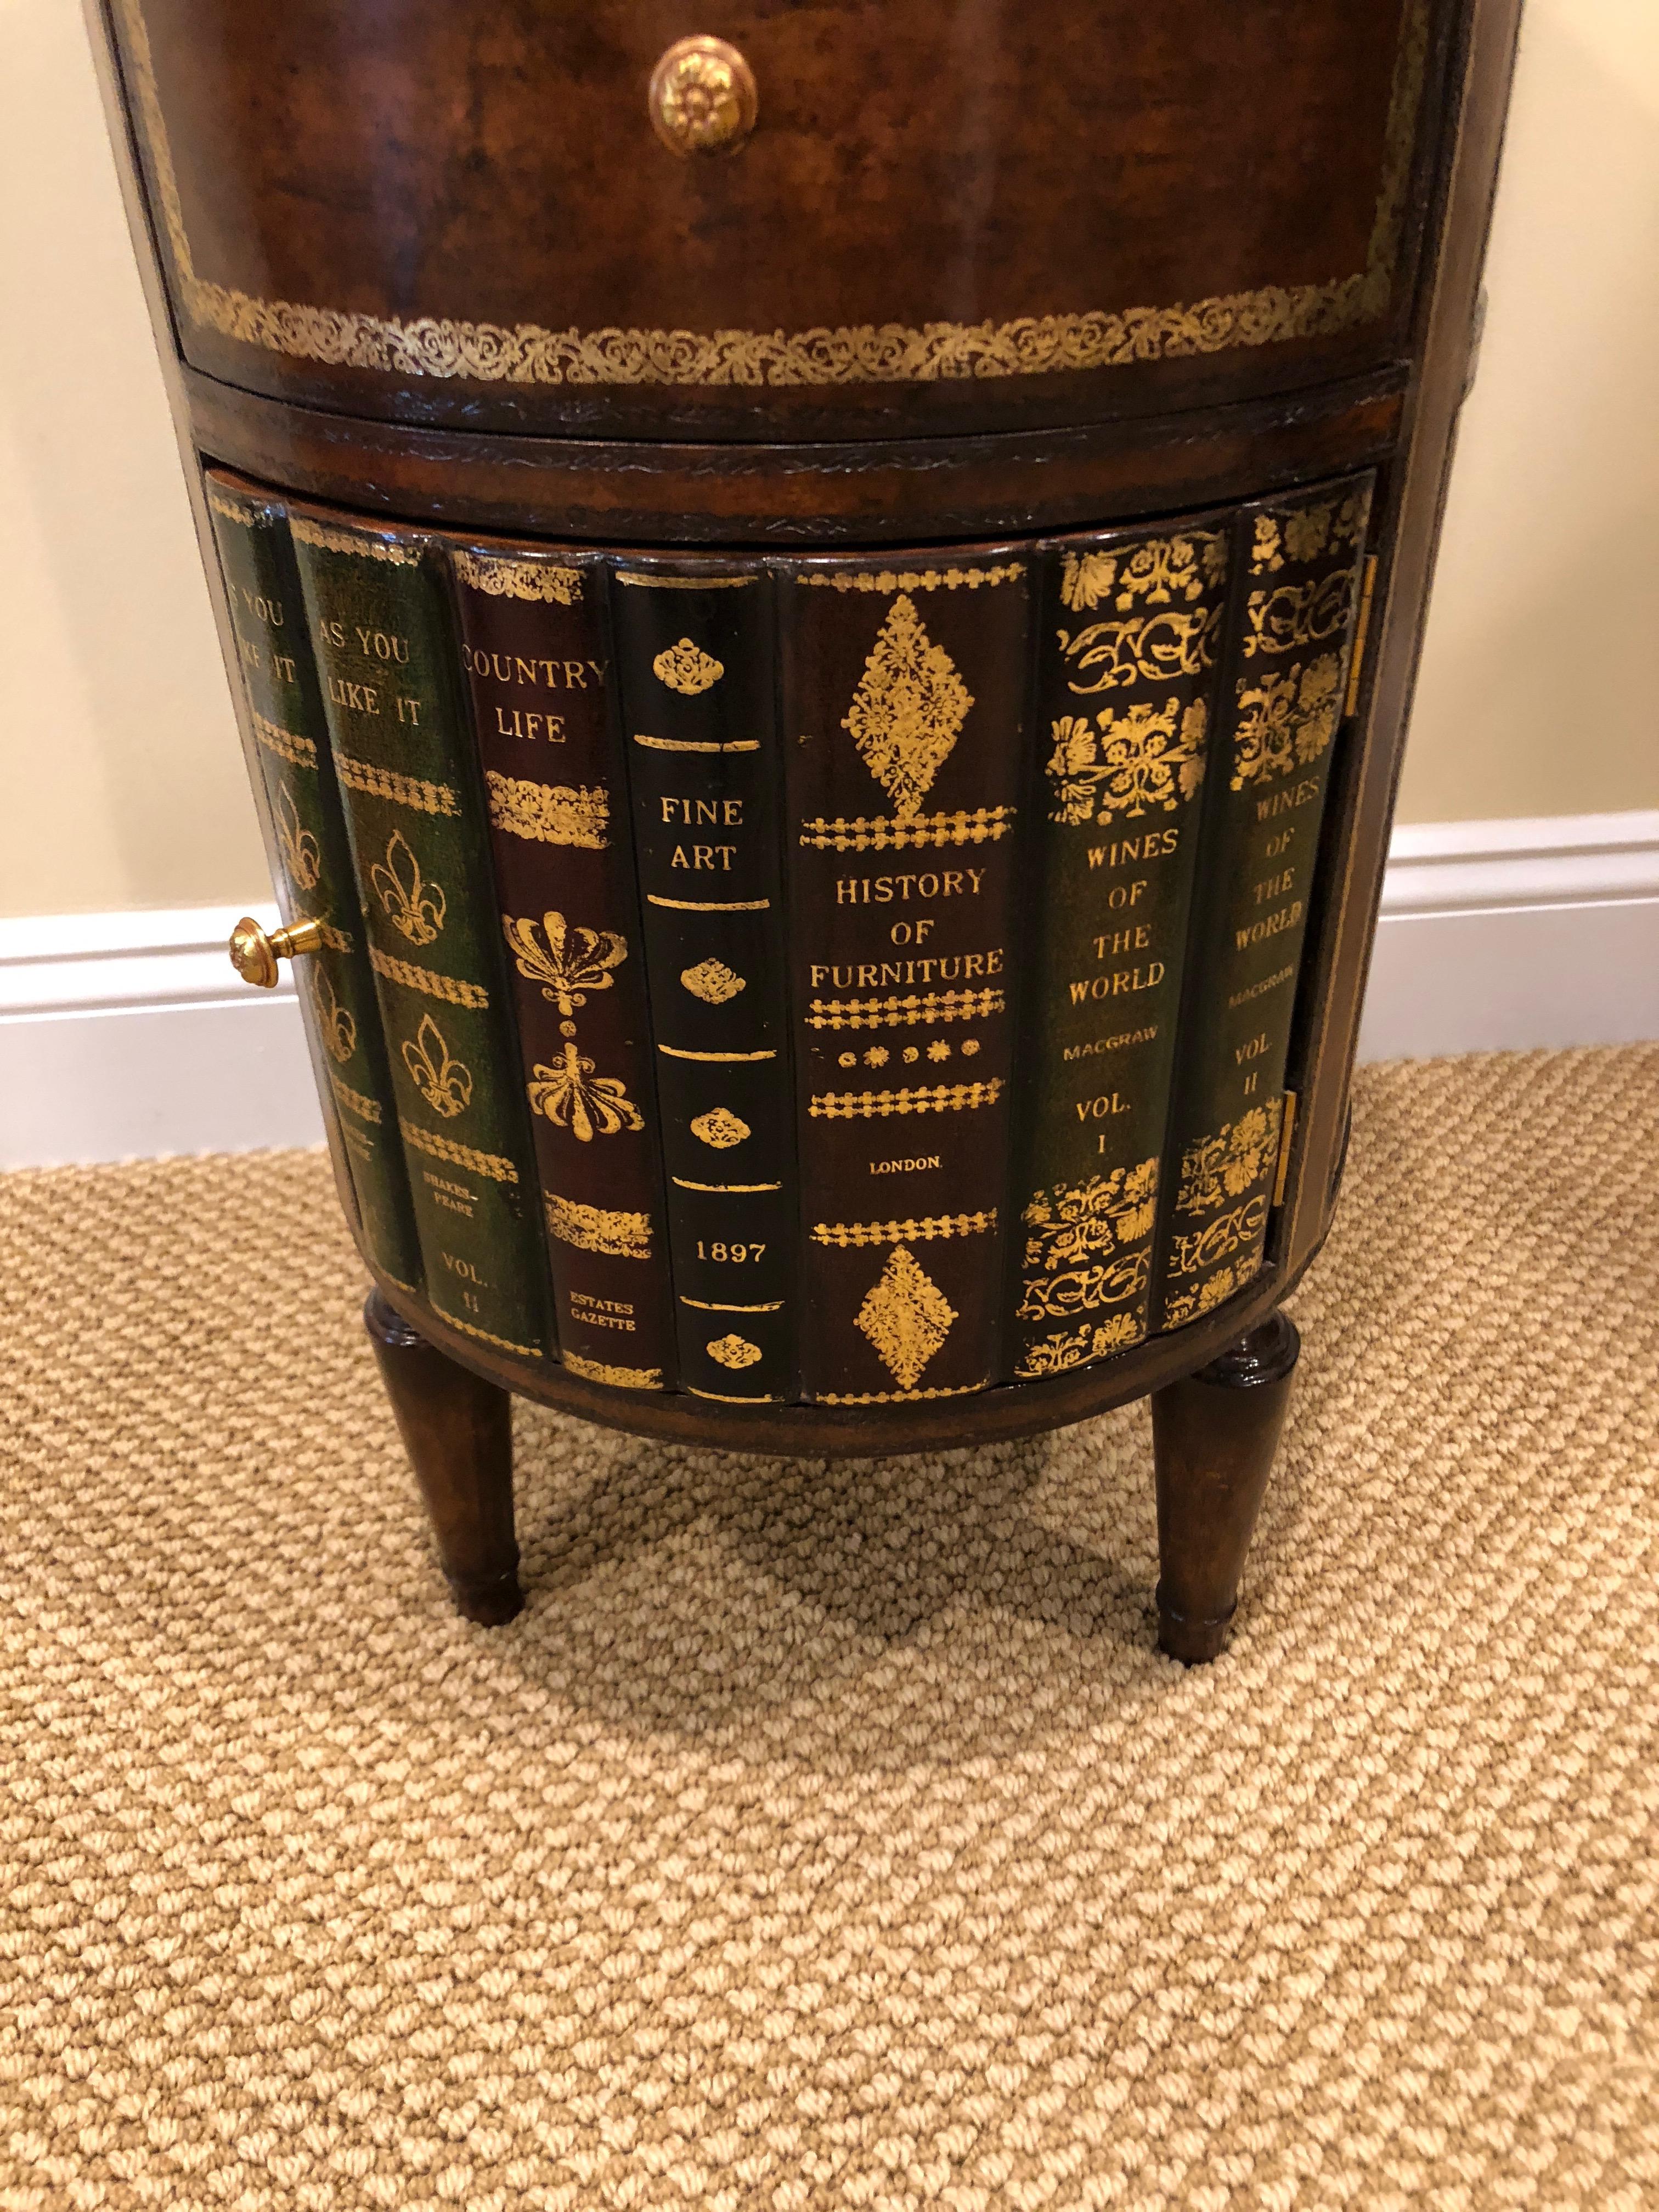 Fabulously fun round tromp l'oeil end table that looks like a collection of leather library books. Two drawers on the front are over a door that opens to reveal storage inside. Beautifully crafted including a tooled leather top.